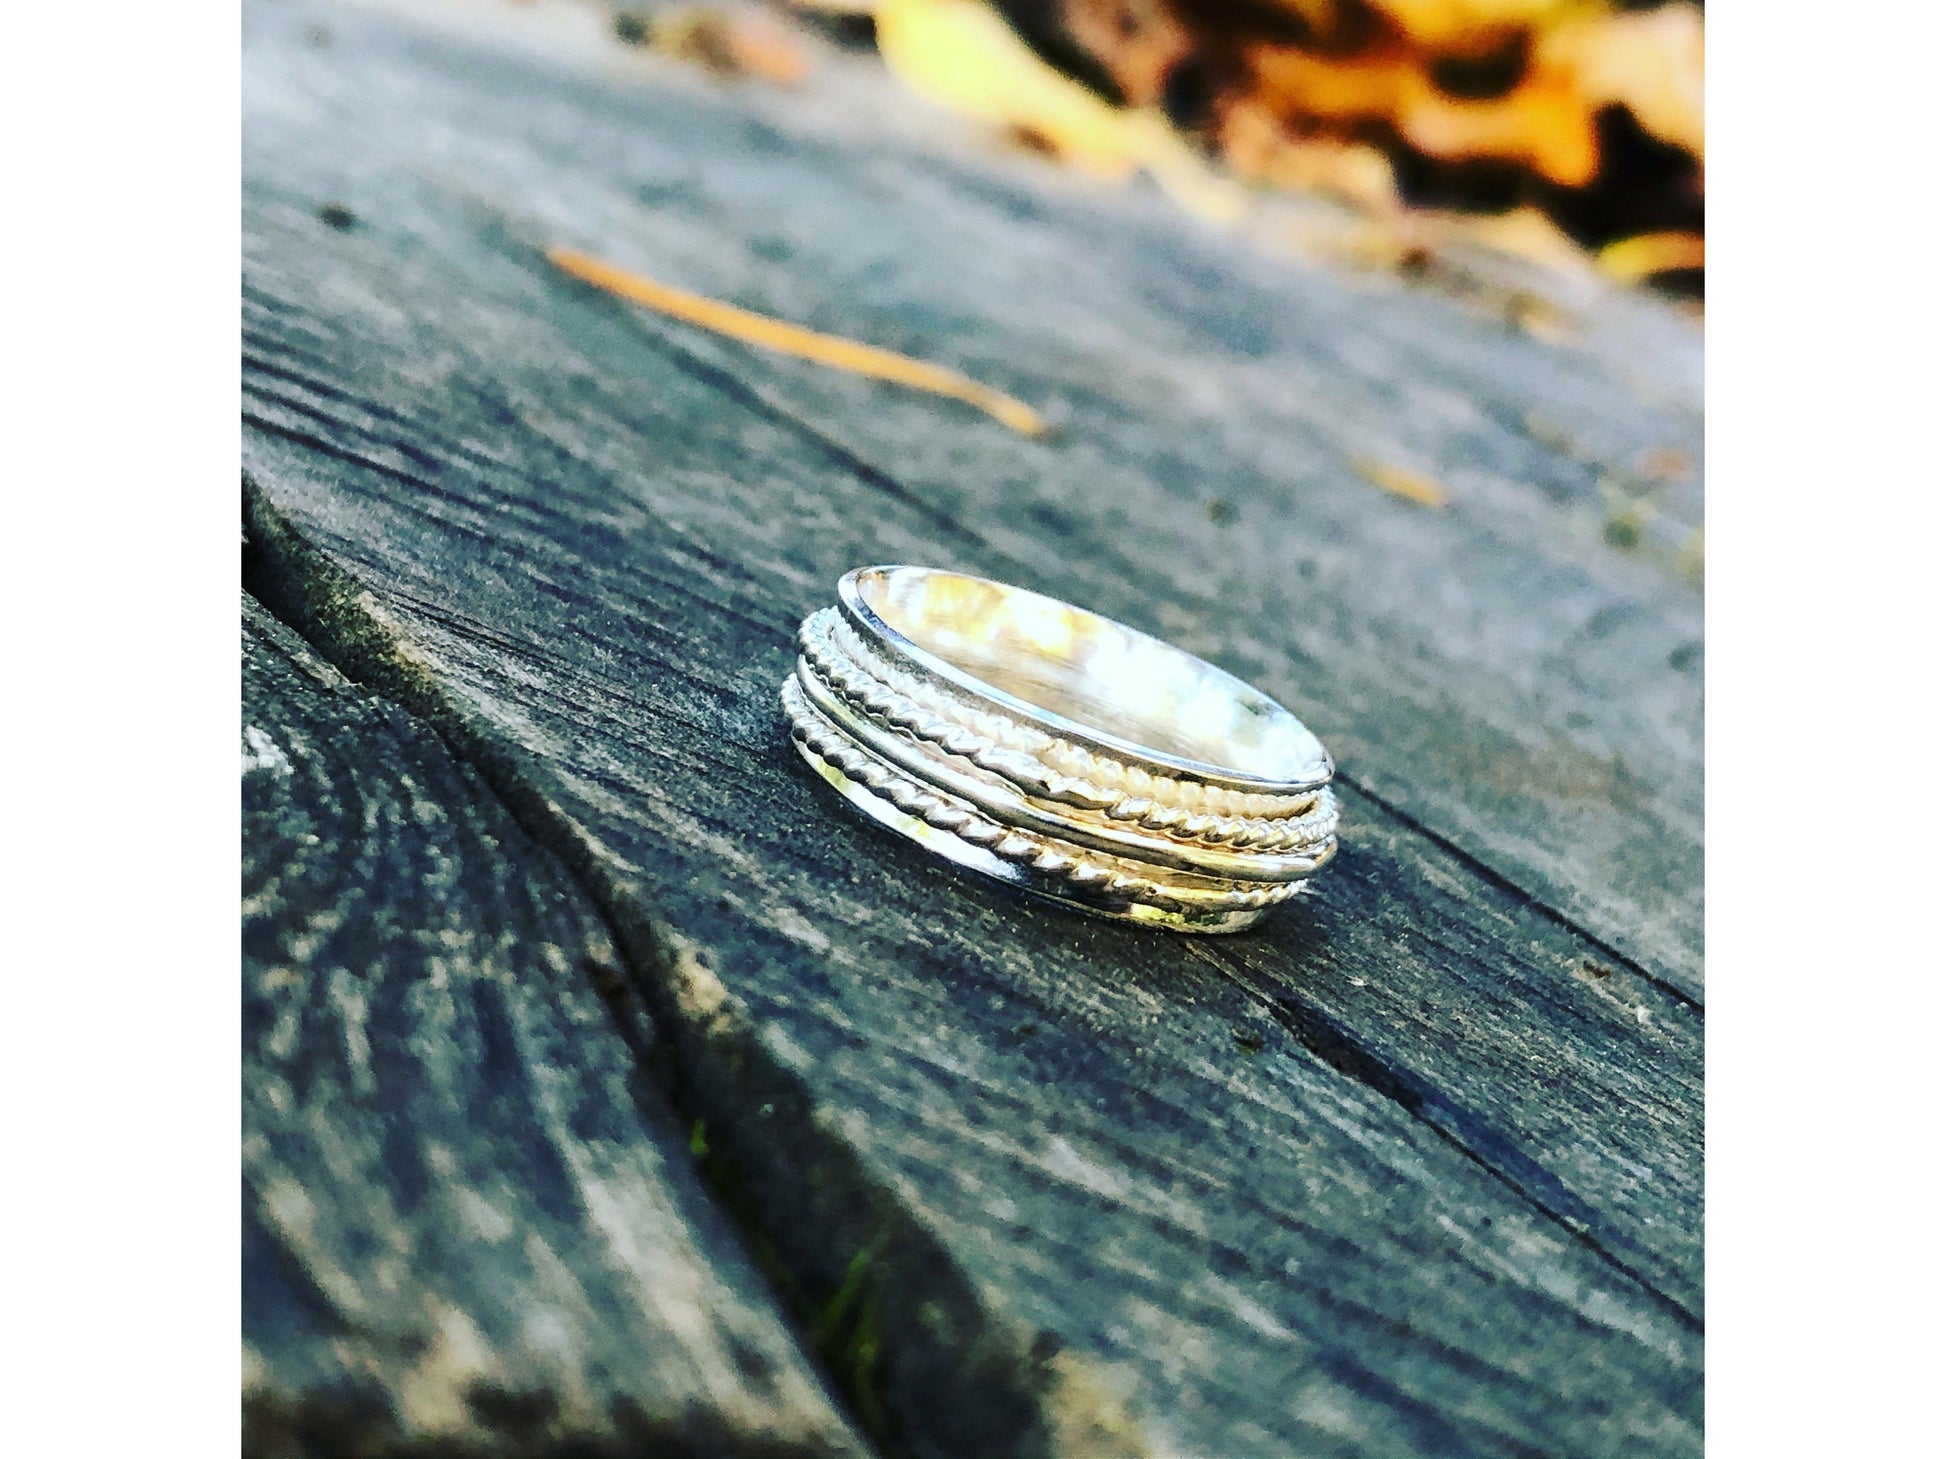 sterling-silver-spinner-ring-meditation-ring-anxiety-ring-fidget-ring-sterling-ring-gift-for-her-worry-ring-sterling-silver-band-sterling